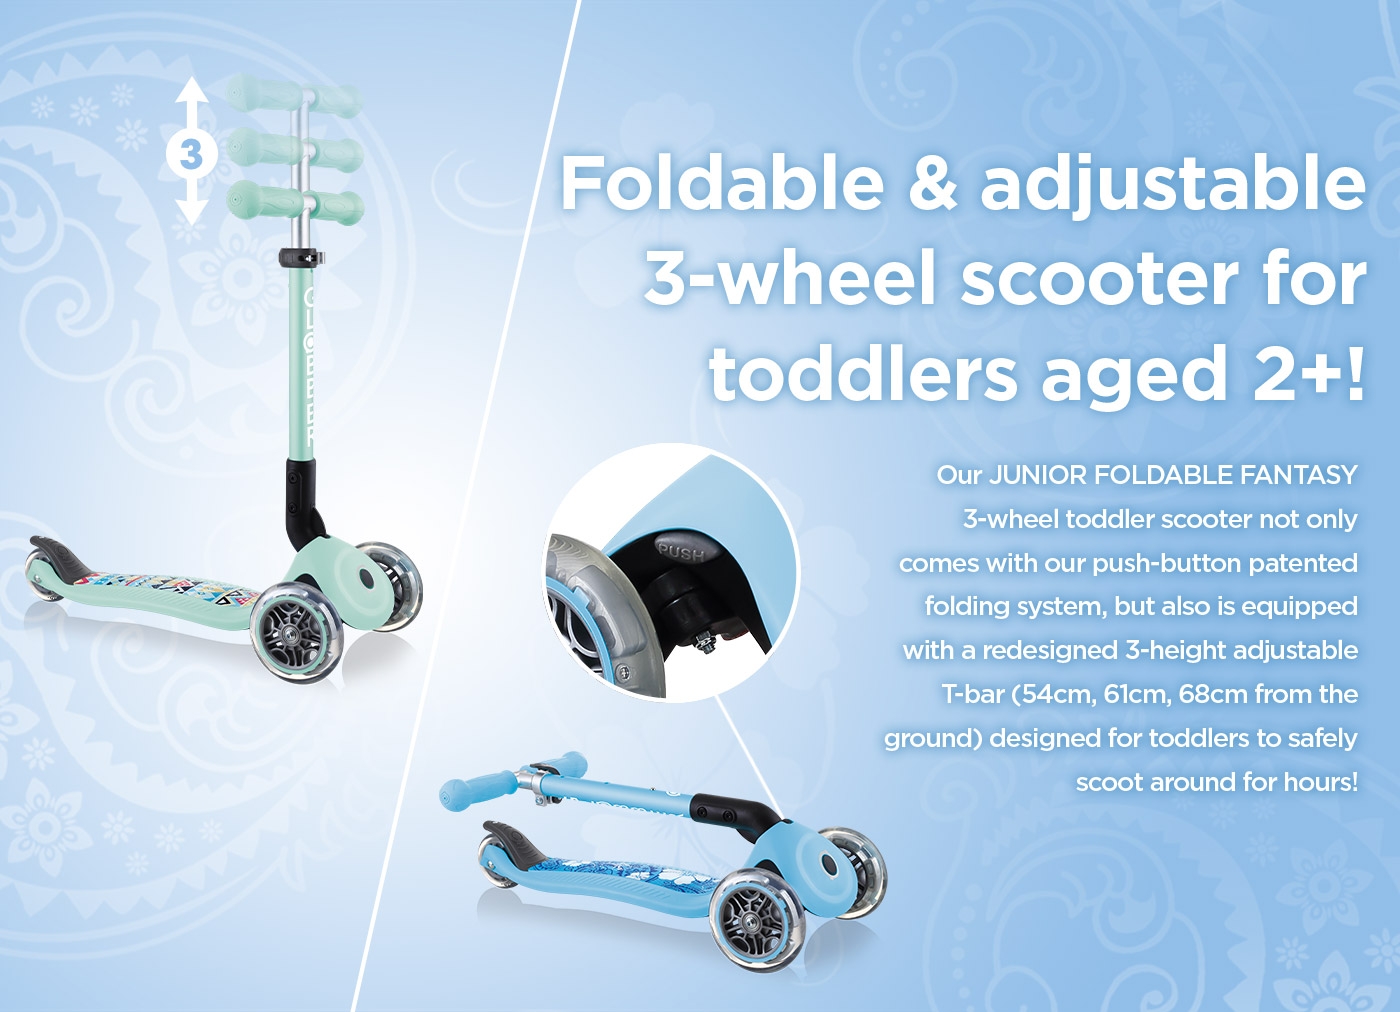 Foldable & adjustable 3-wheel scooter for toddlers aged 2+! Our JUNIOR FOLDABLE FANTASY 3-wheel toddler scooter not only comes with our push-button patented folding system, but also is equipped with a redesigned 3-height adjustable T-bar (54cm, 61cm, 68cm from the ground) designed for toddlers to safely scoot around for hours! 